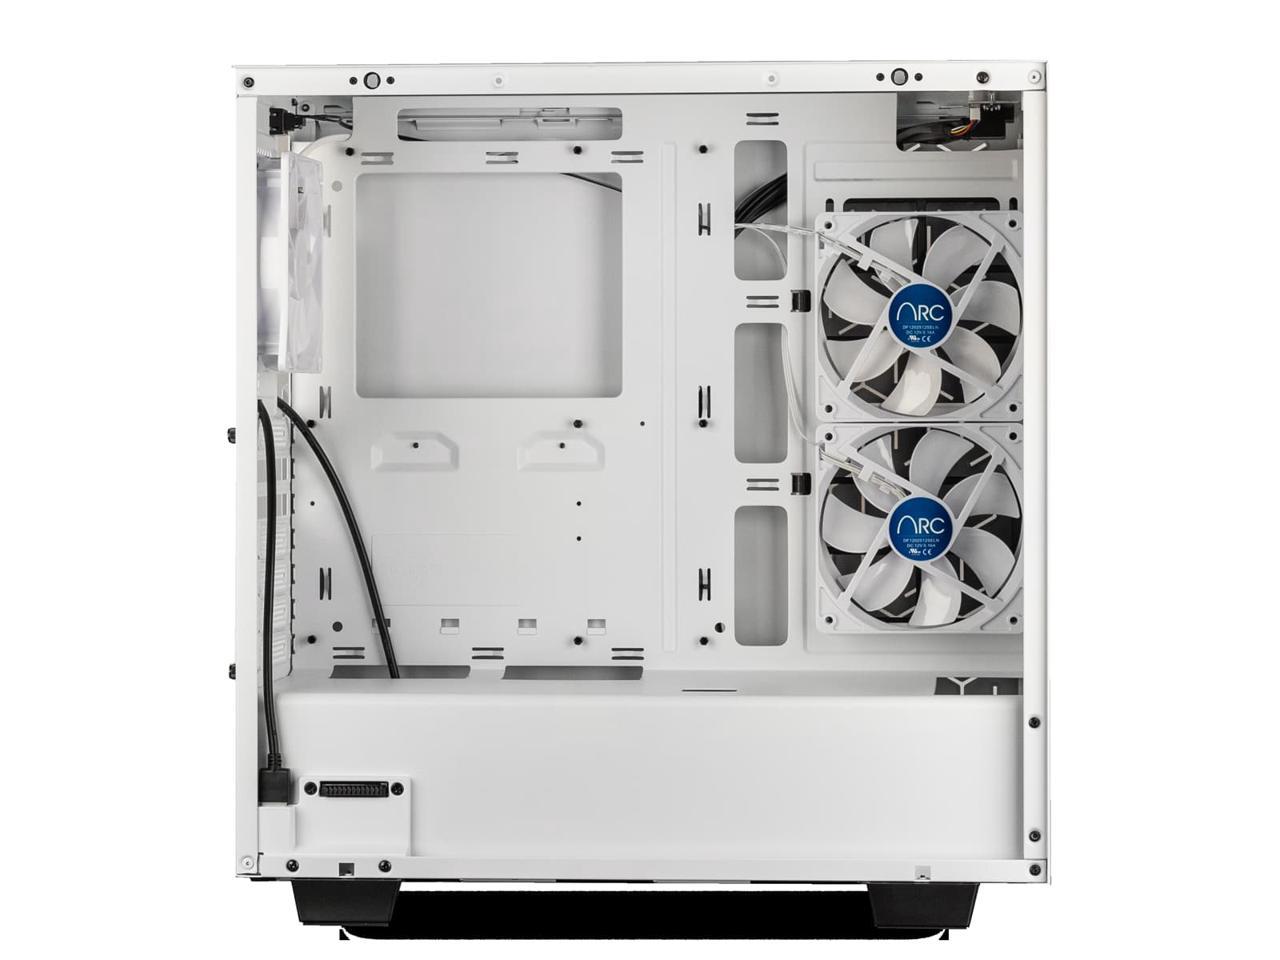 White iBUYPOWER Snowblind S 19 Translucent Customizable Side-Panel LCD Display 1280 x 1024 Resolution Mid-Tower Desktop Computer Gaming Case 3 x 120mm Fans SECC Steel 